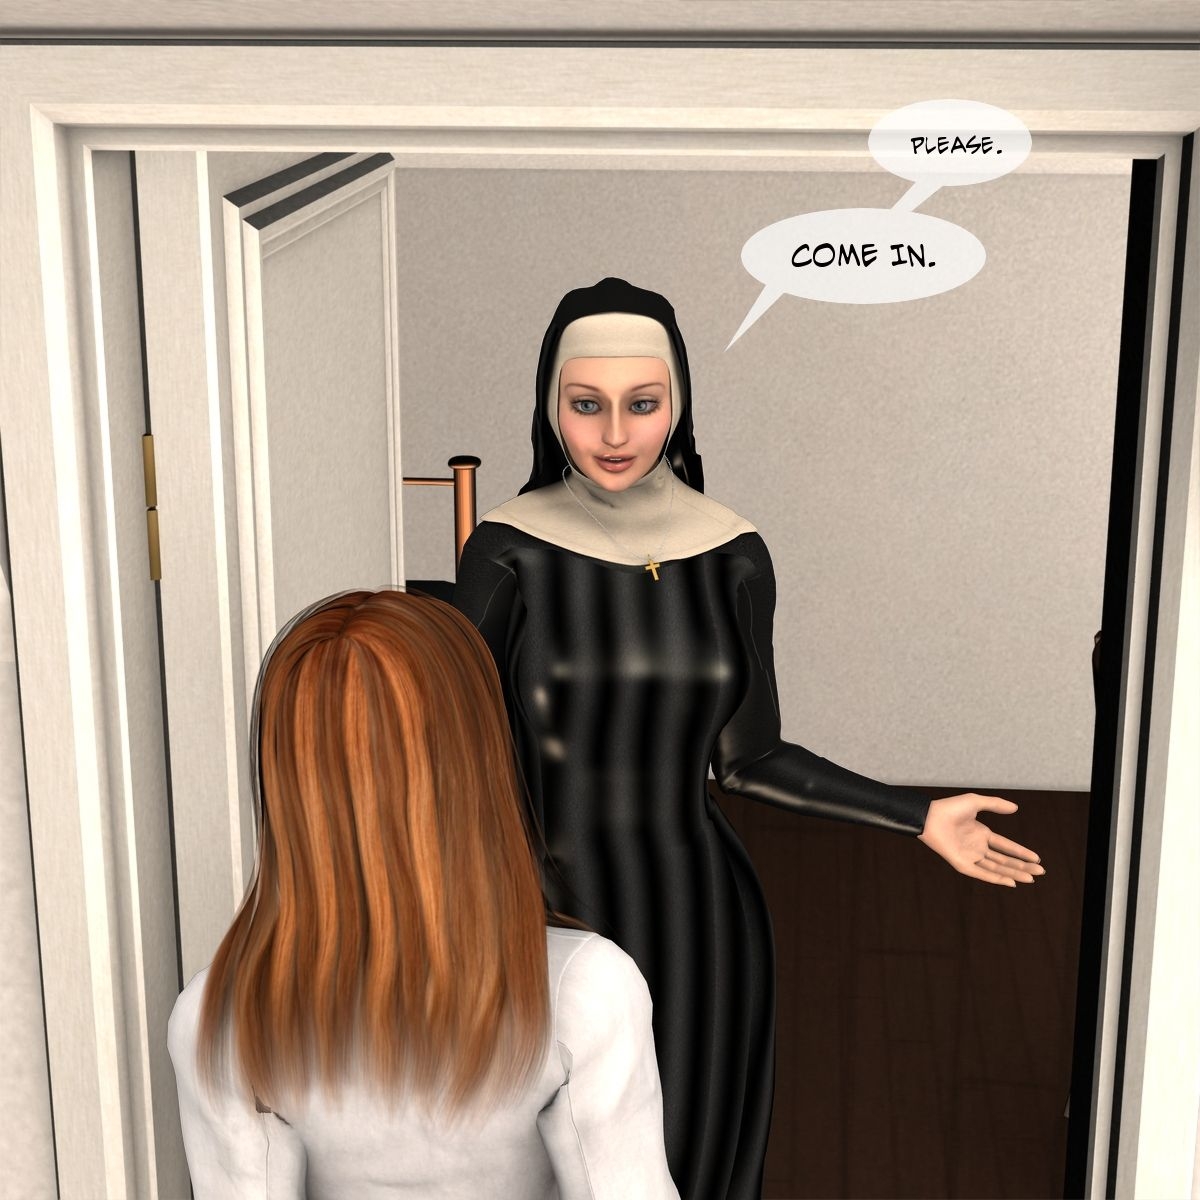 [Fasdeviant] St. Irene: Our Lady of Lust Chapter 01 3